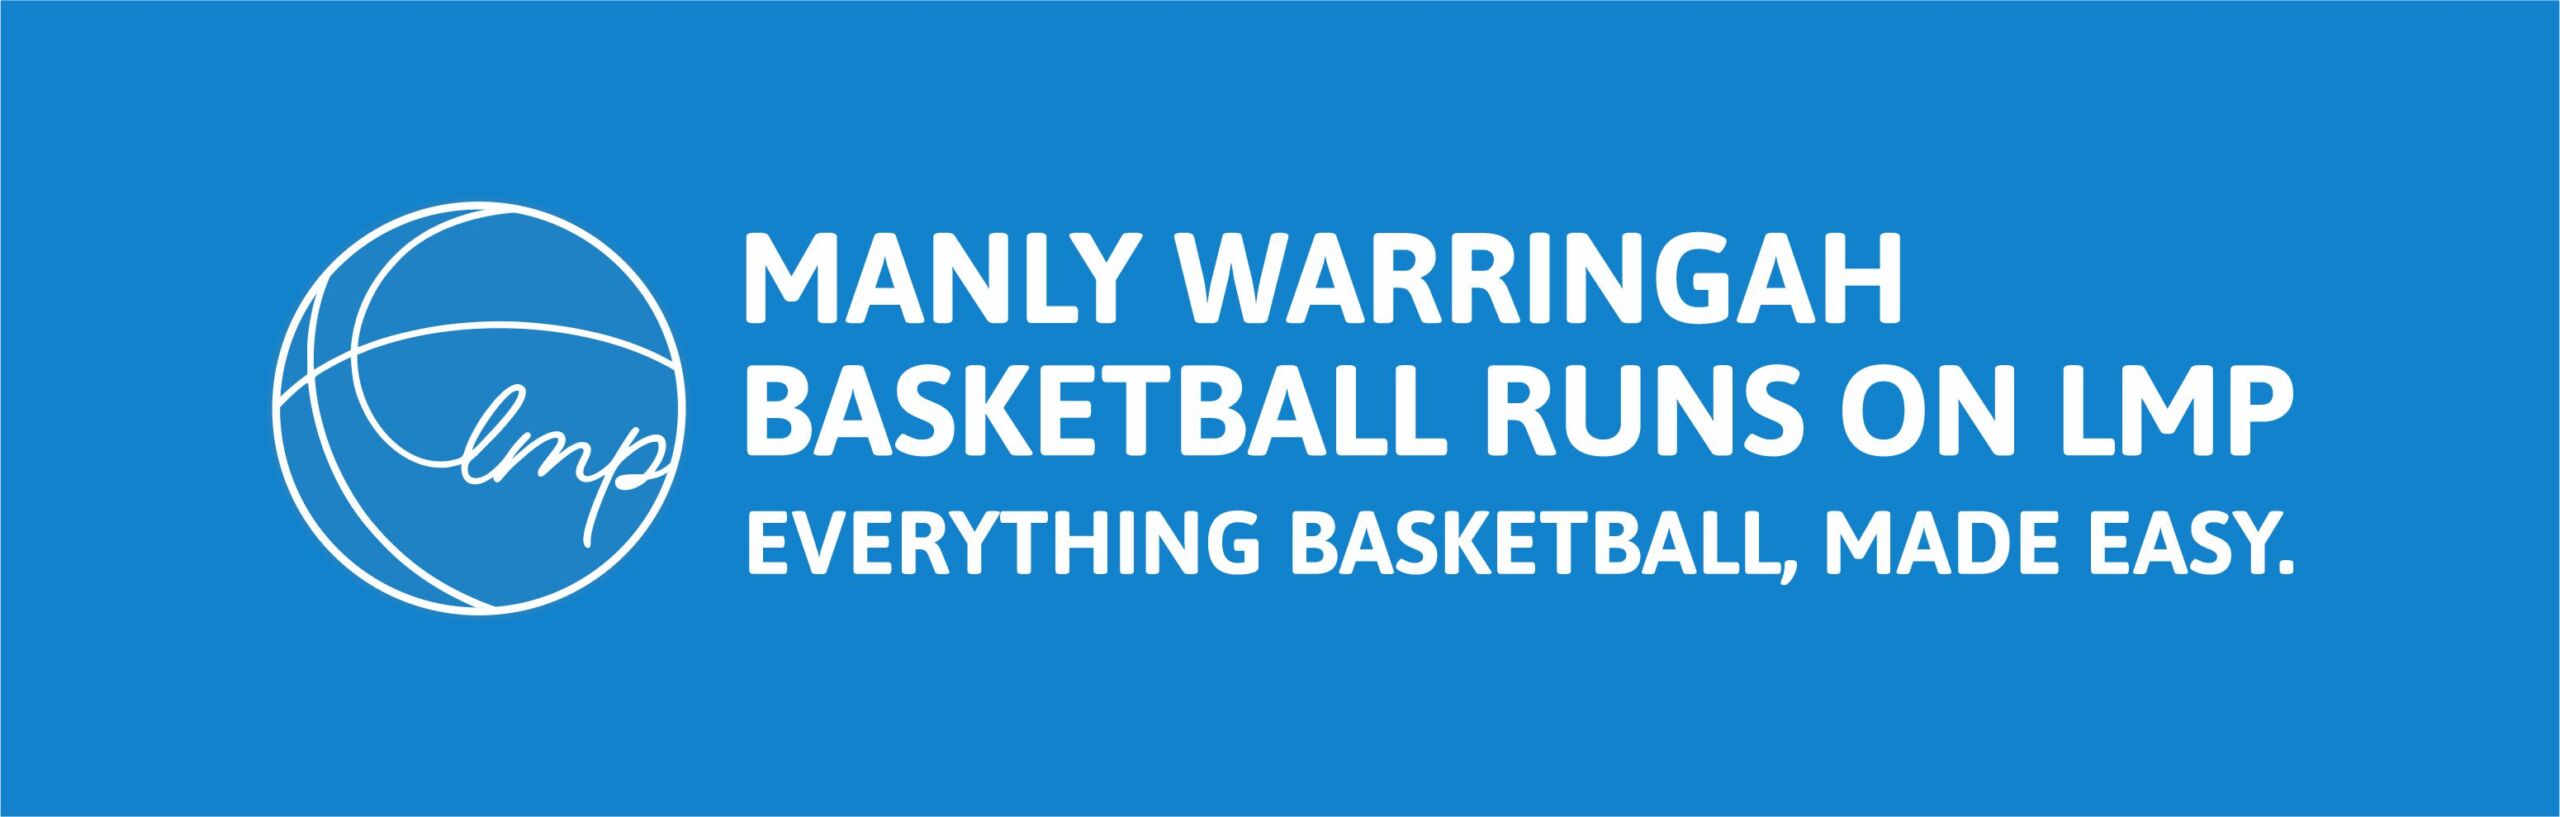 Let Me Play - Everything Basketball, Made Easy.